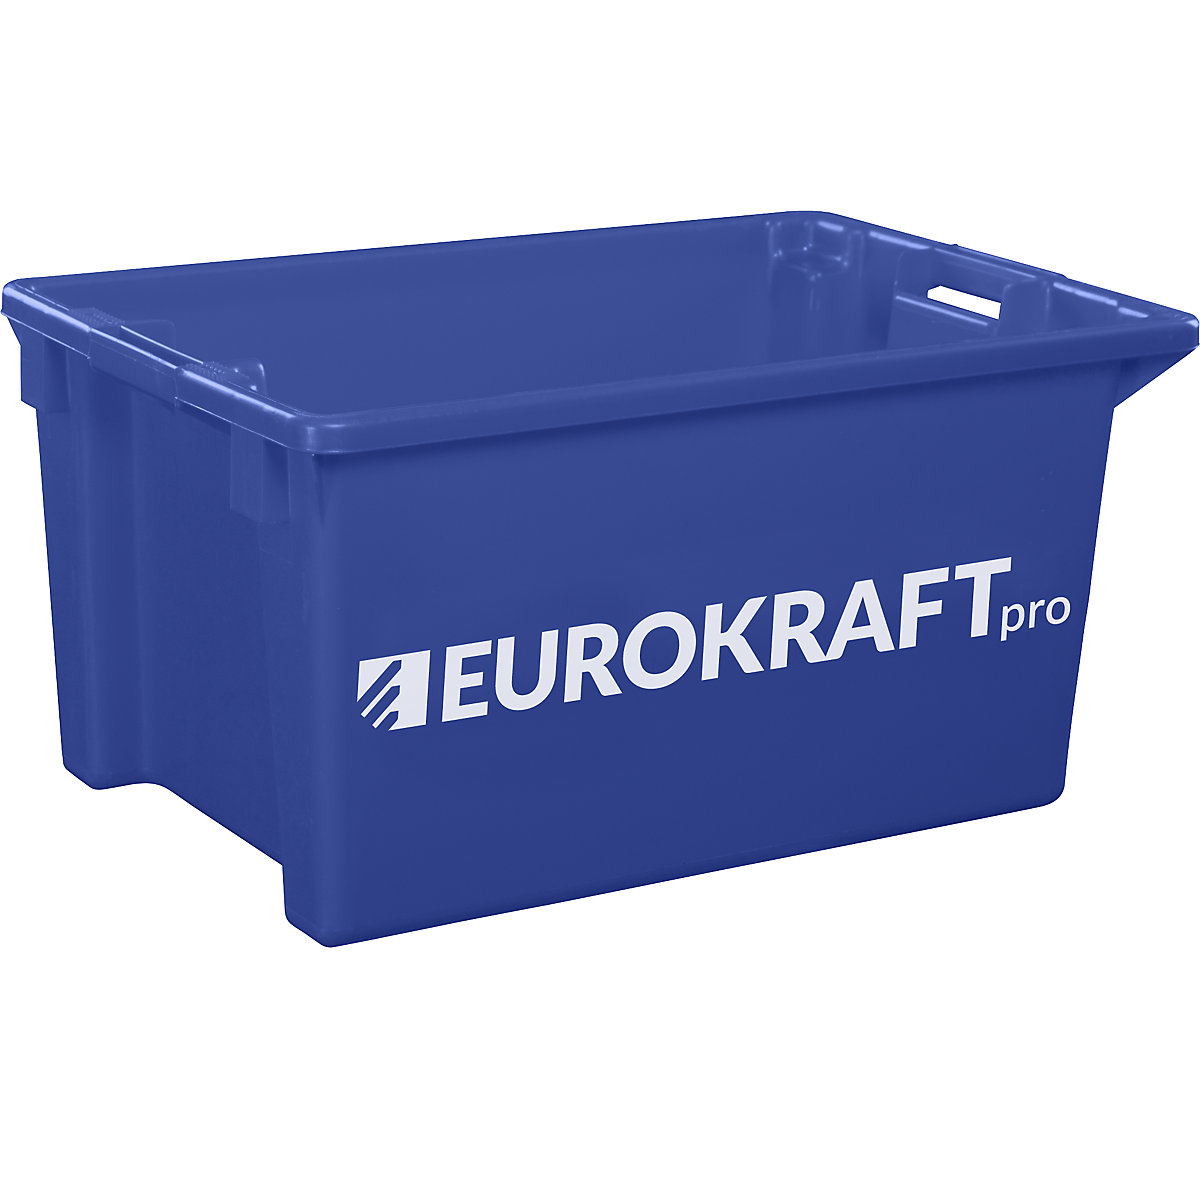 EUROKRAFTpro – Stack/nest container made of polypropylene suitable for foodstuffs, 70 l capacity, pack of 2, solid walls and base, blue